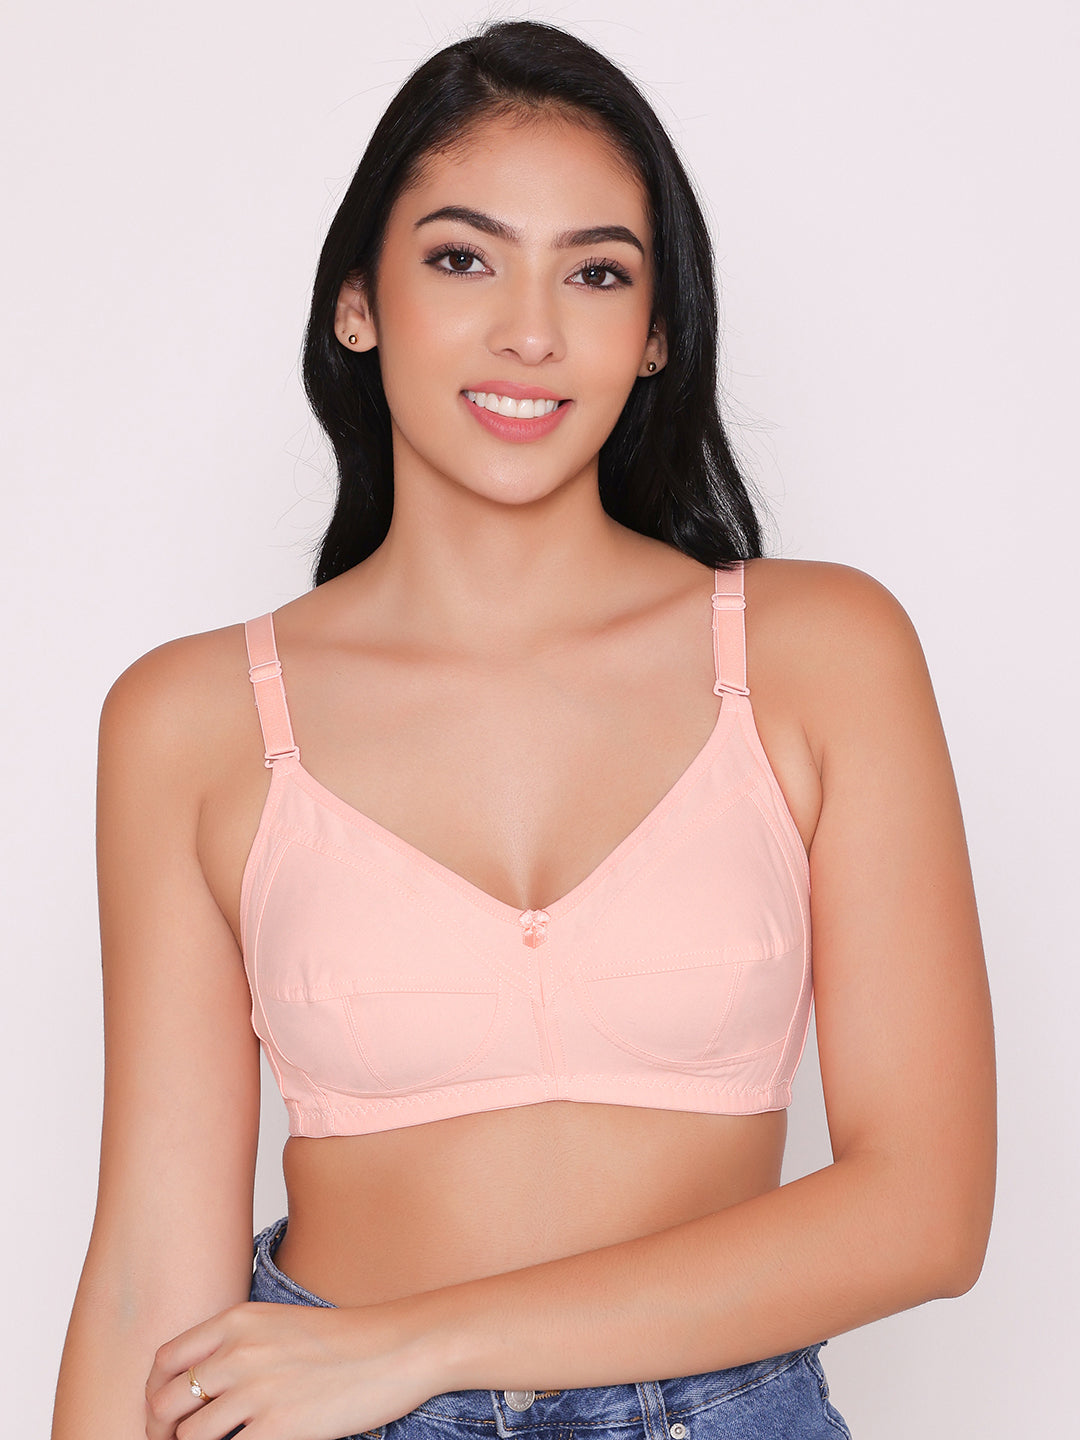 Buy Ladies Cotton Full Coverage Bras Online in India at Lowest